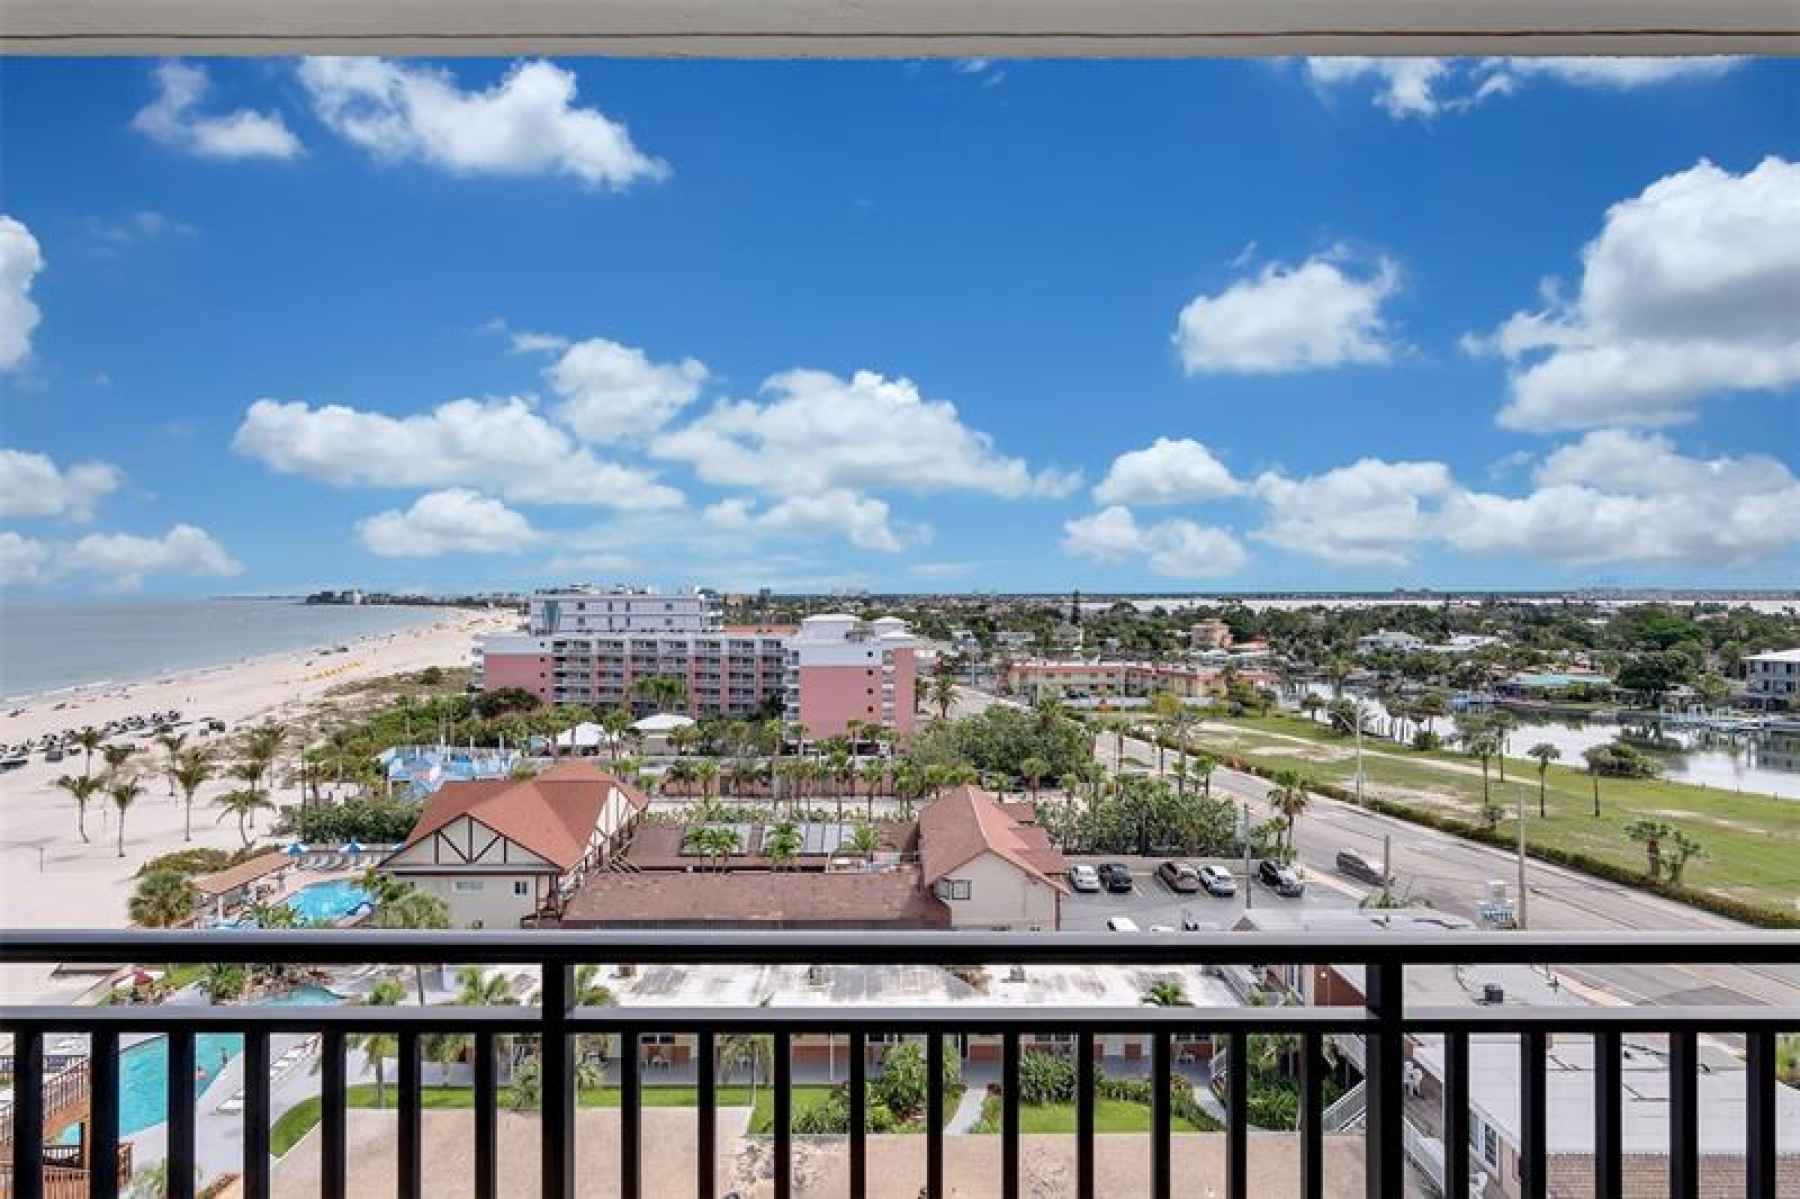 Looking north from the east balcony up popular Gulf Blvd. and toward the inter-coastal waterway